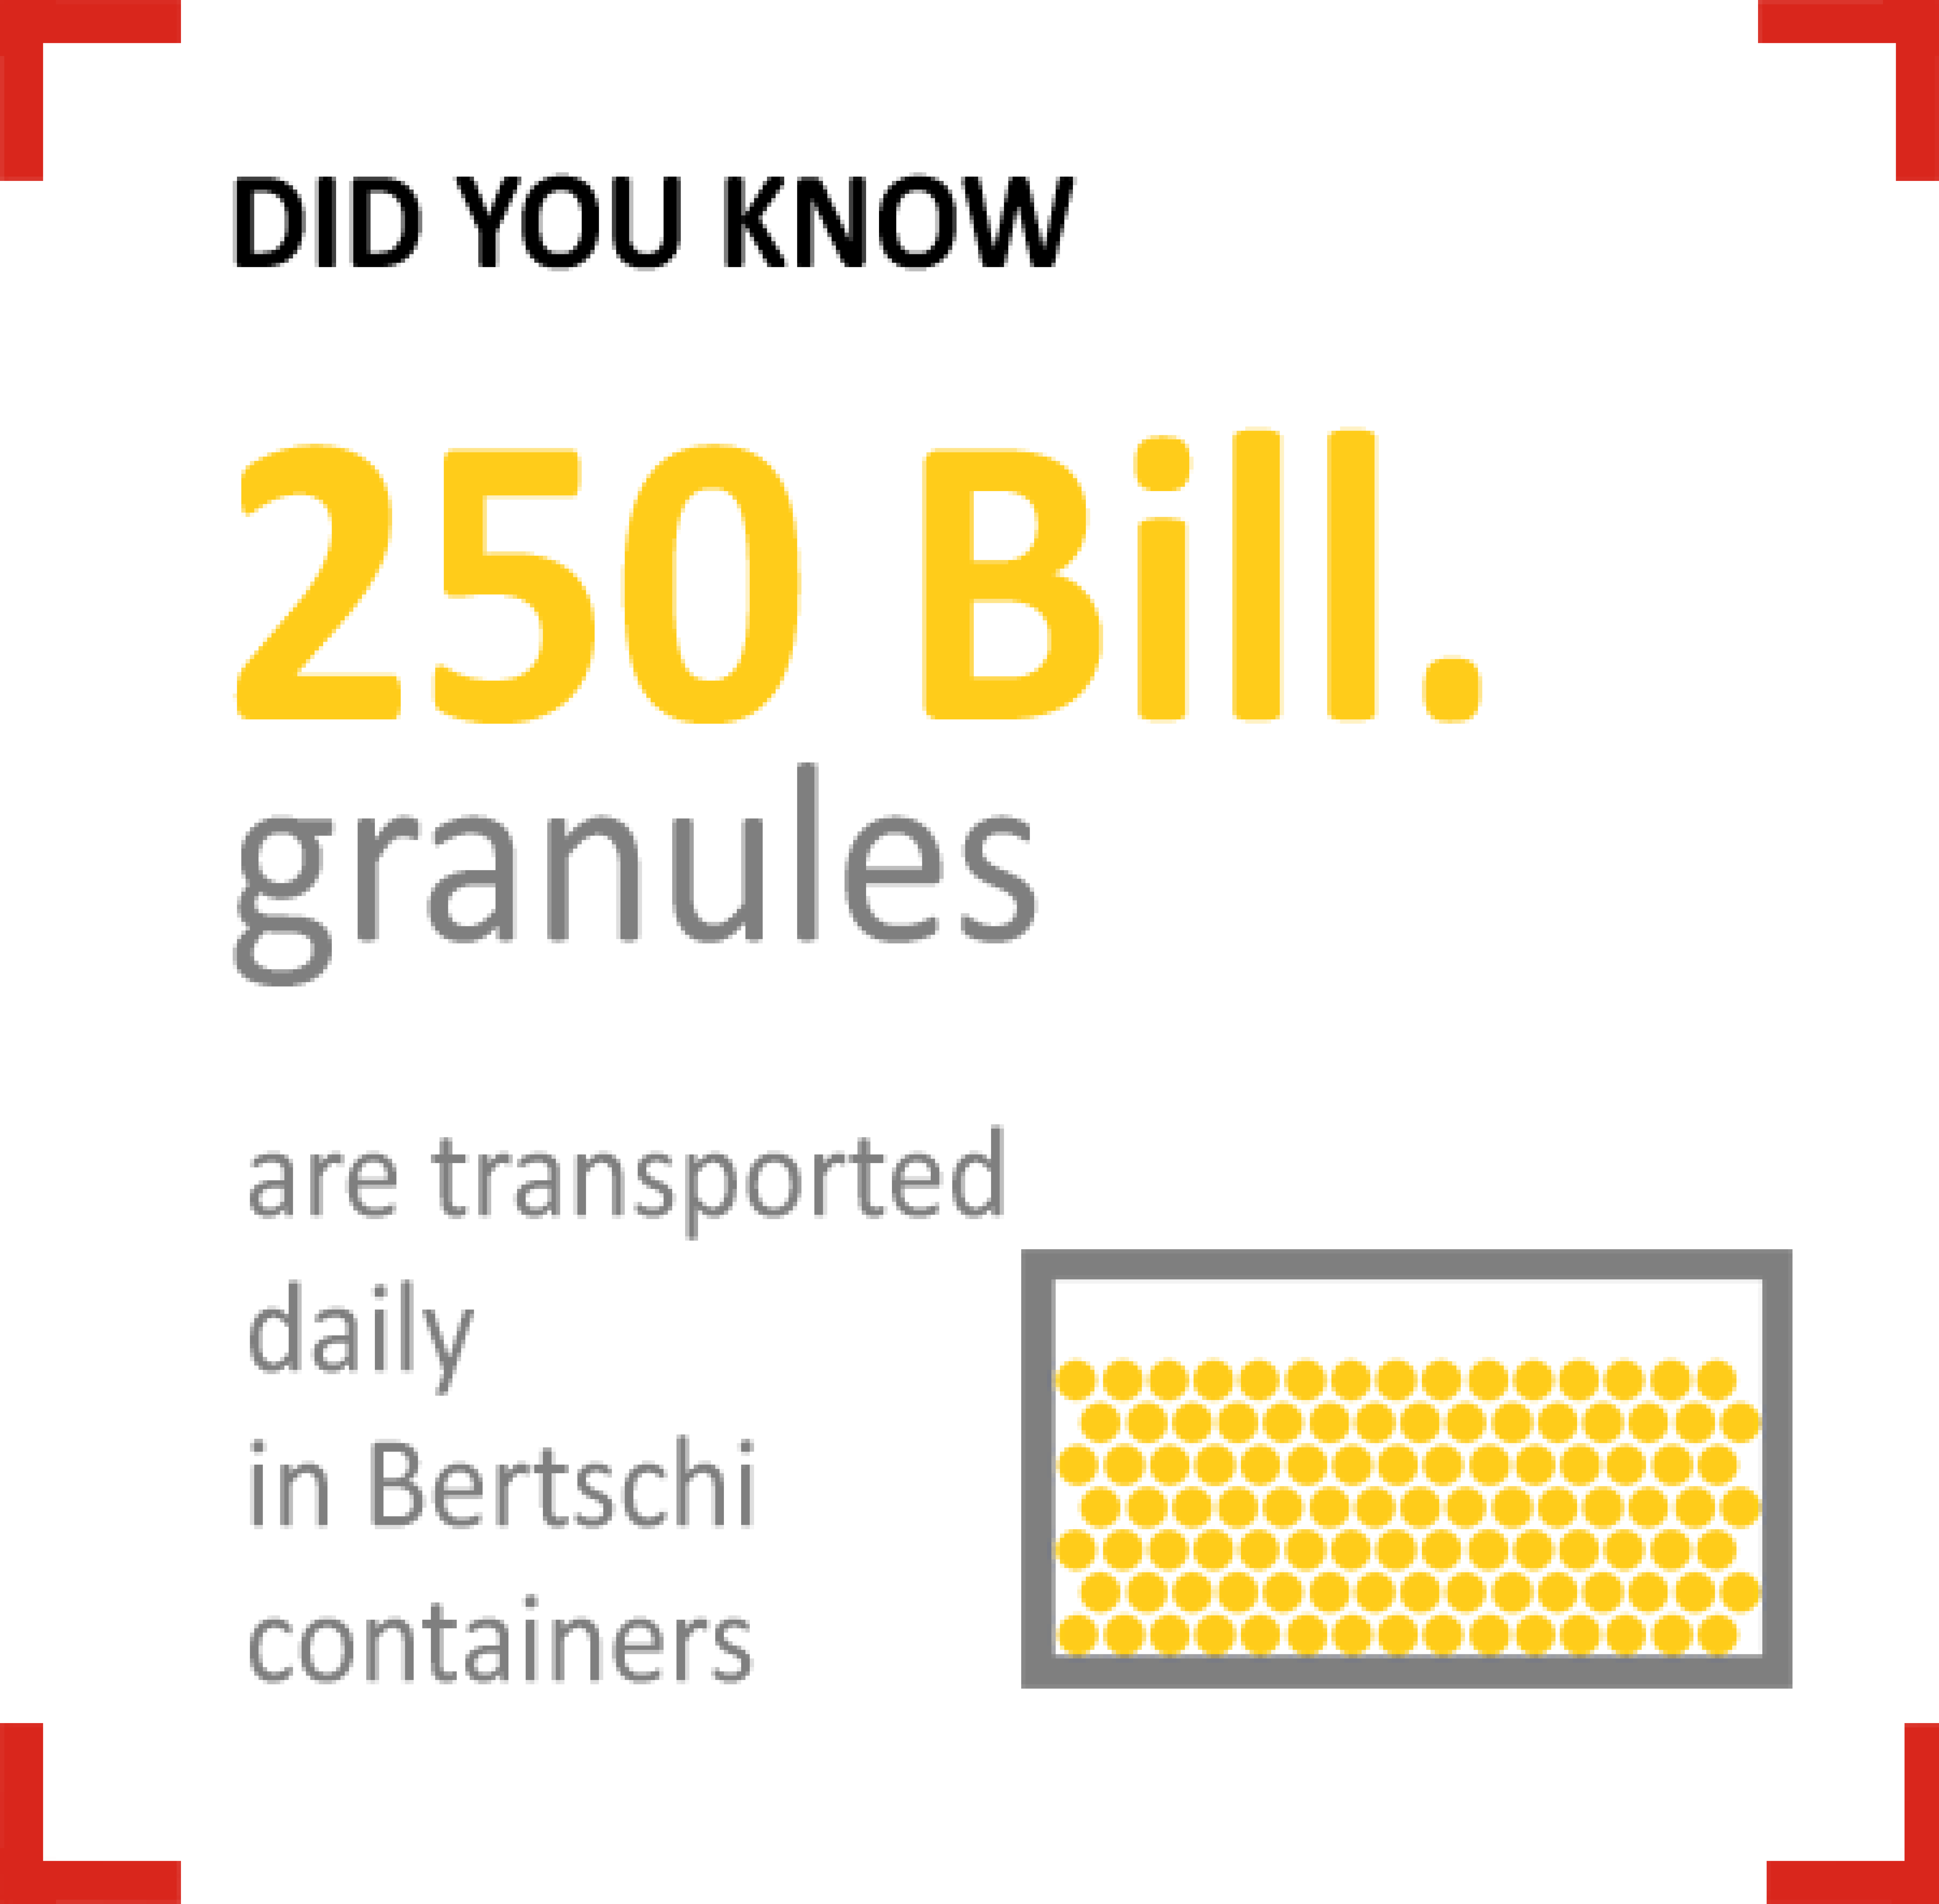 A figure of the 250 billion granules that Bertschi carries every single day.